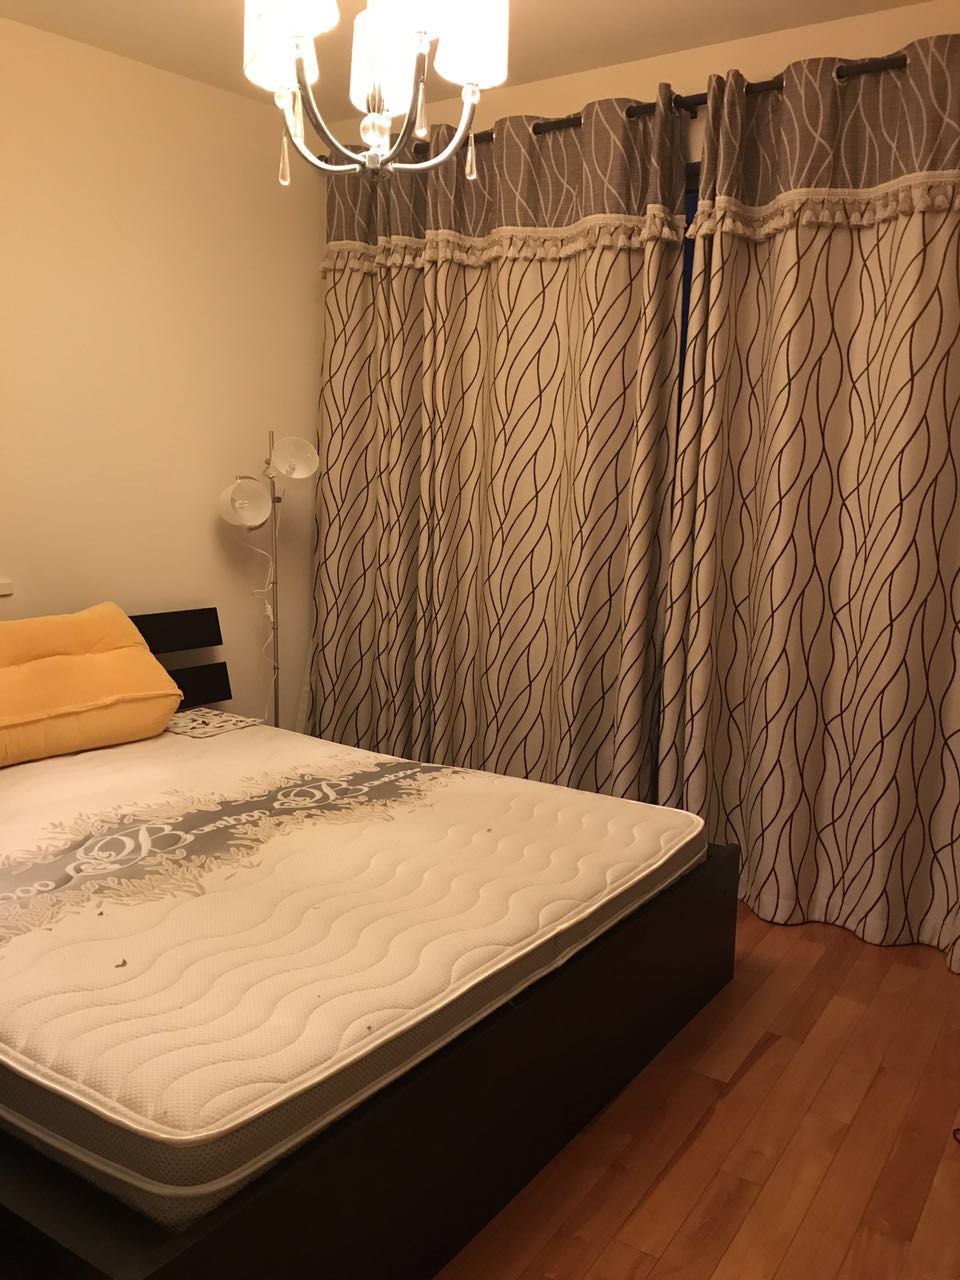 find an apartment in Jing\an Spacious and well maintained (176sqm) 3bedroom apartment near Nanjing W Rd in Ladoll for rent